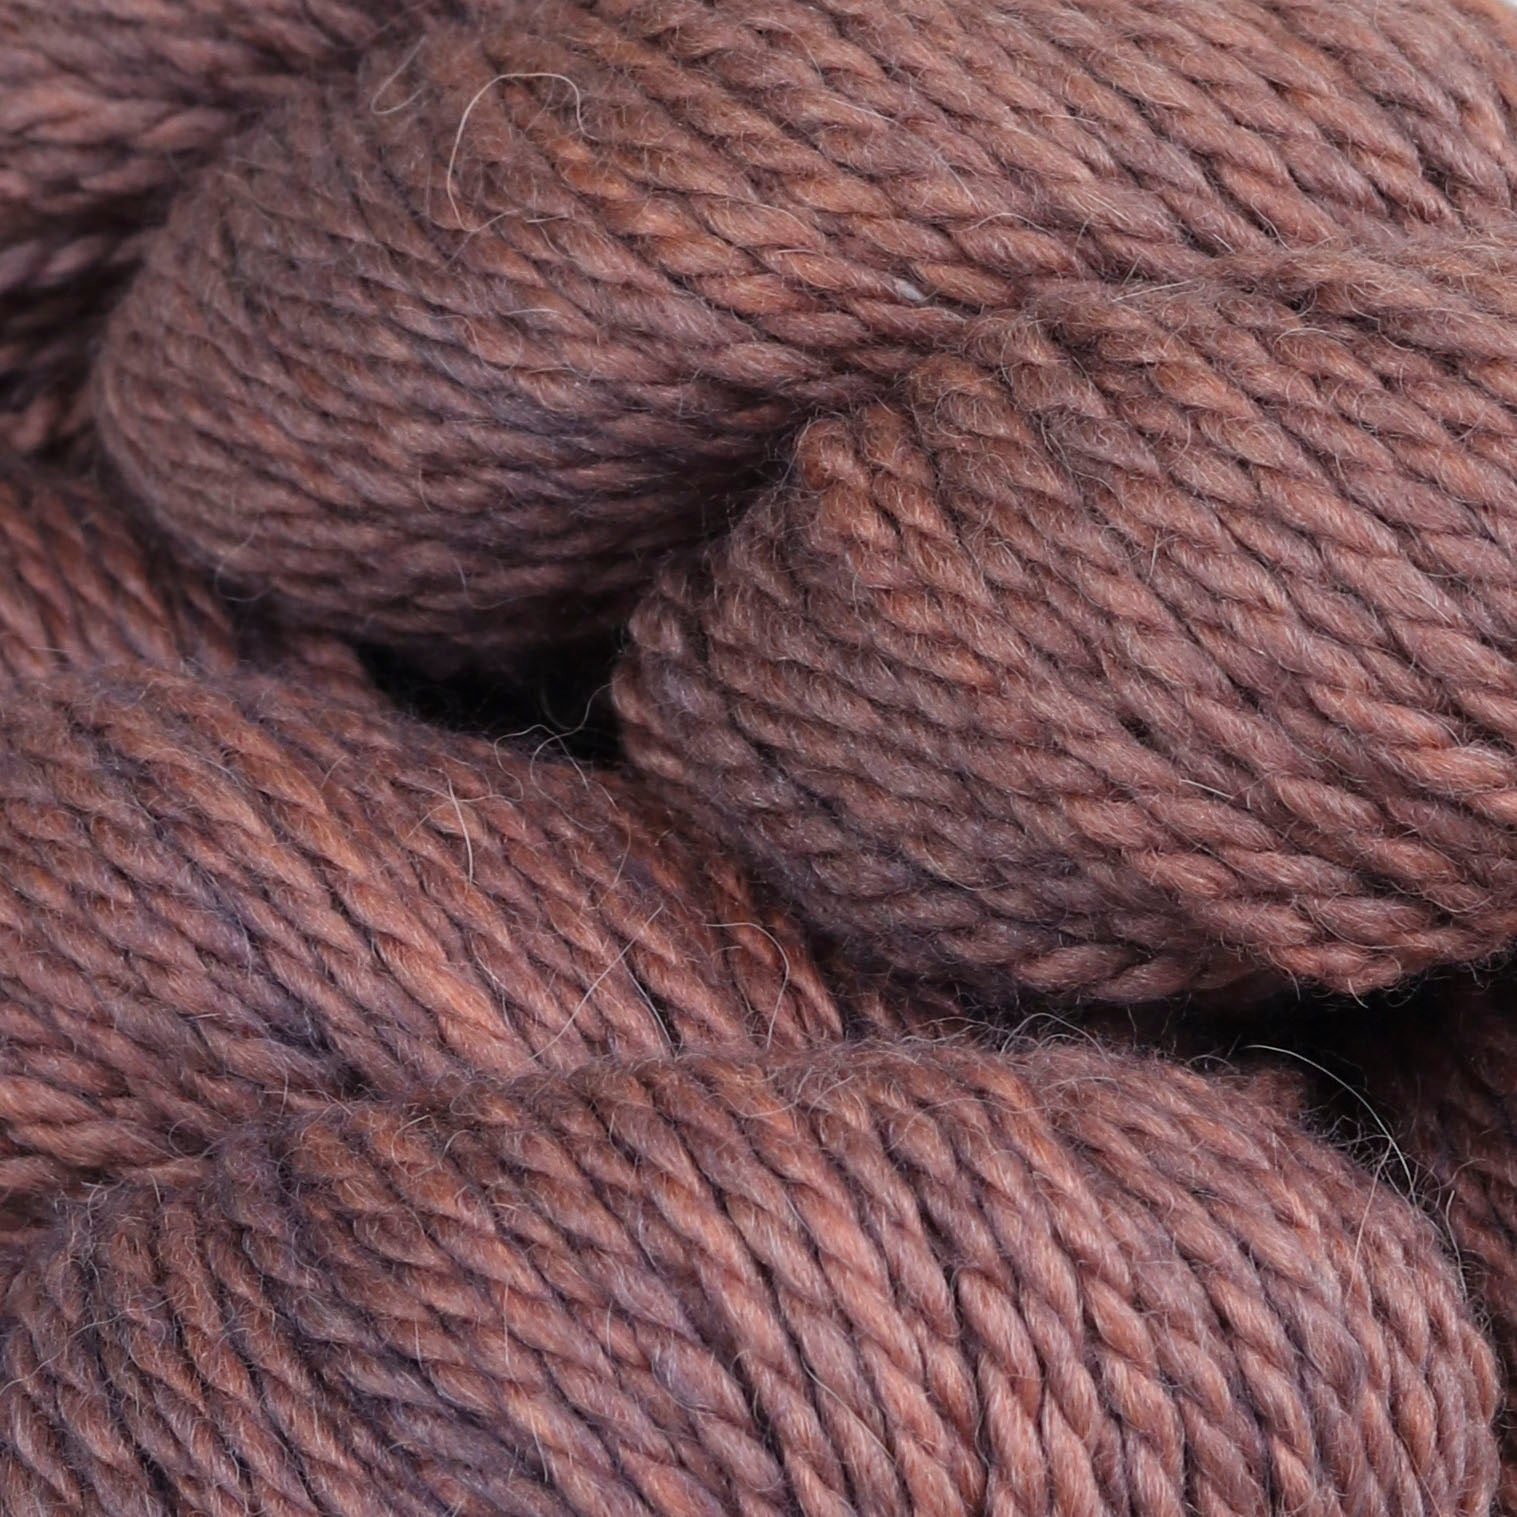 Image of the Fibre Co. Tundra in Mink a muted lavender color with sienna undertones.